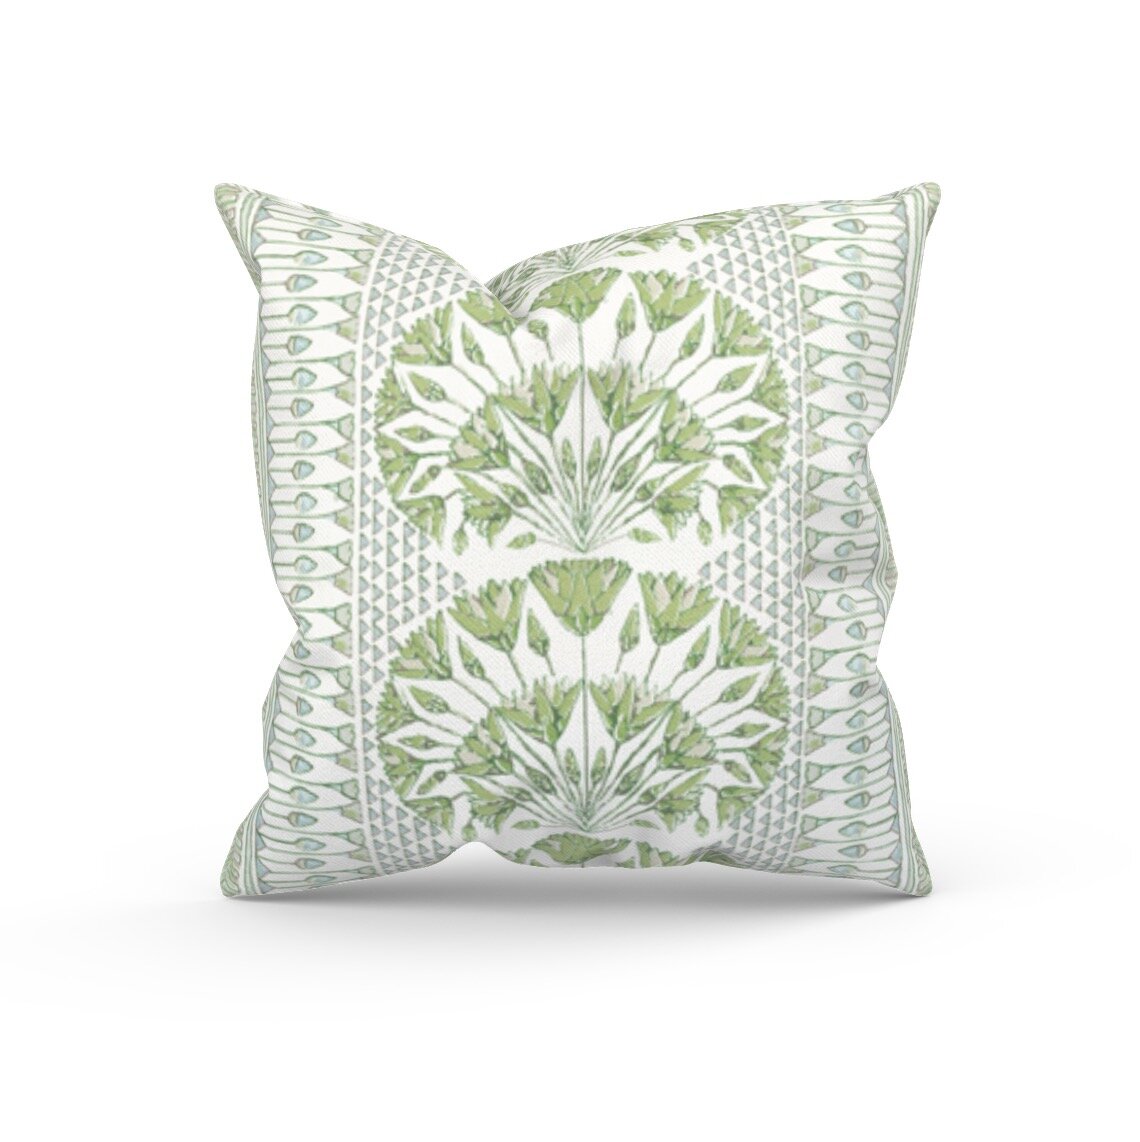 Thibaut Cairo Anna French Linen Lumbar Case Designer Floral Print Throw Pillow Cover in Lime Green with Zipper Best Home Decorating